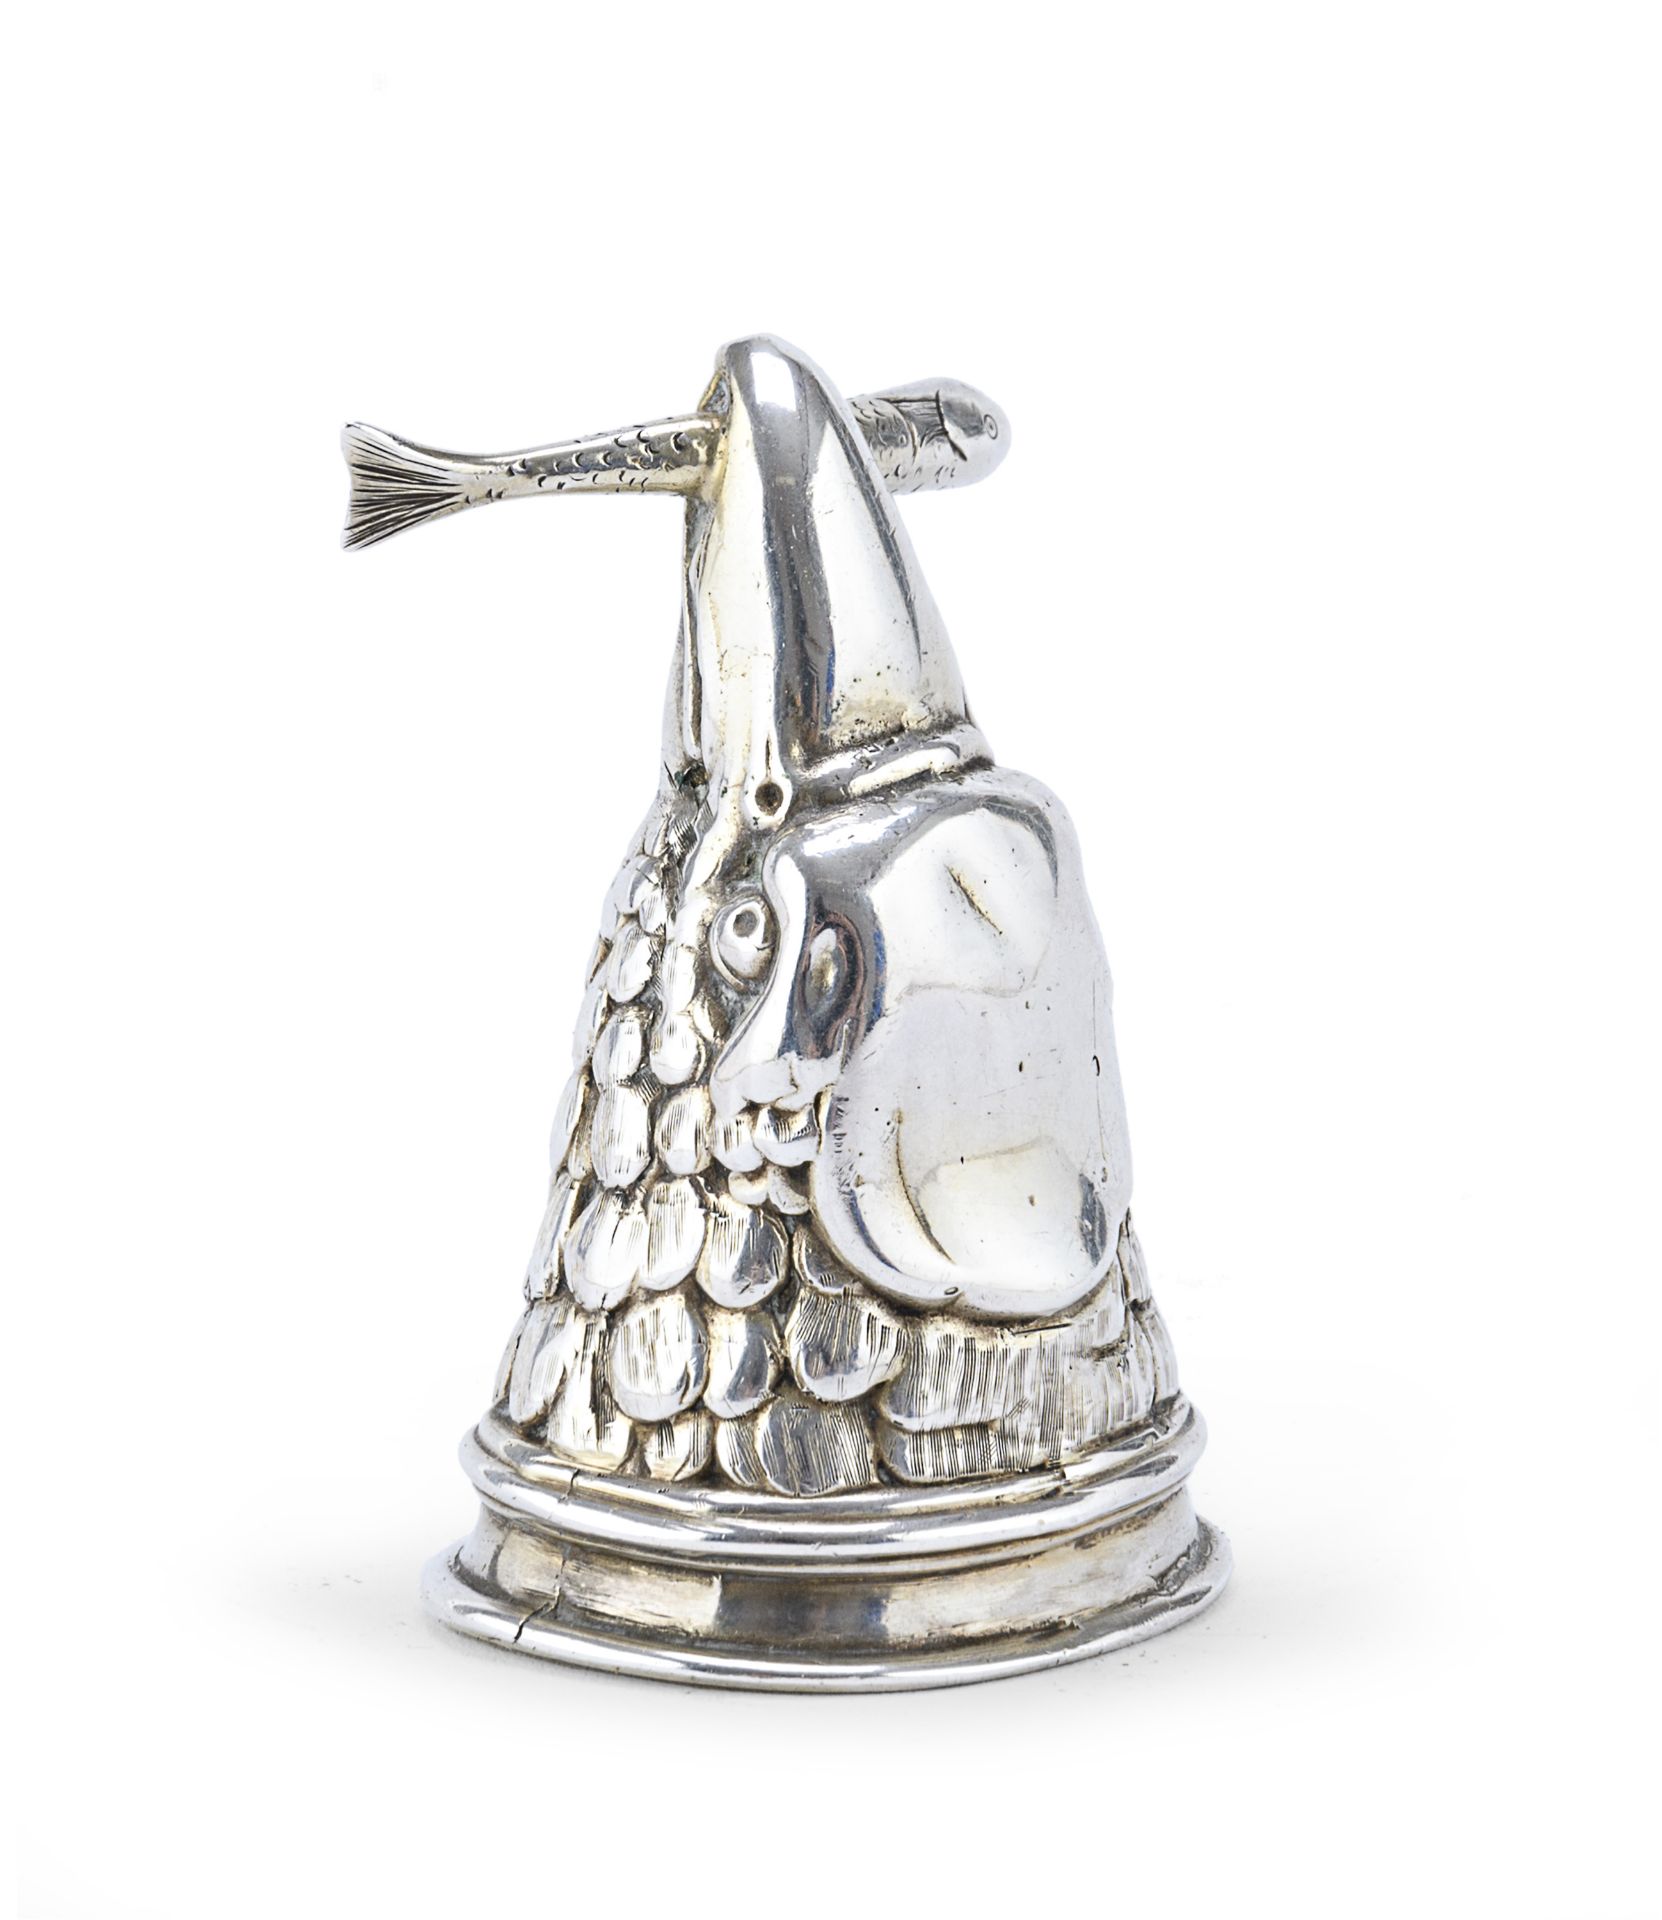 SILVER BELL ENGLAND EARLY 19TH CENTURY - Image 2 of 2